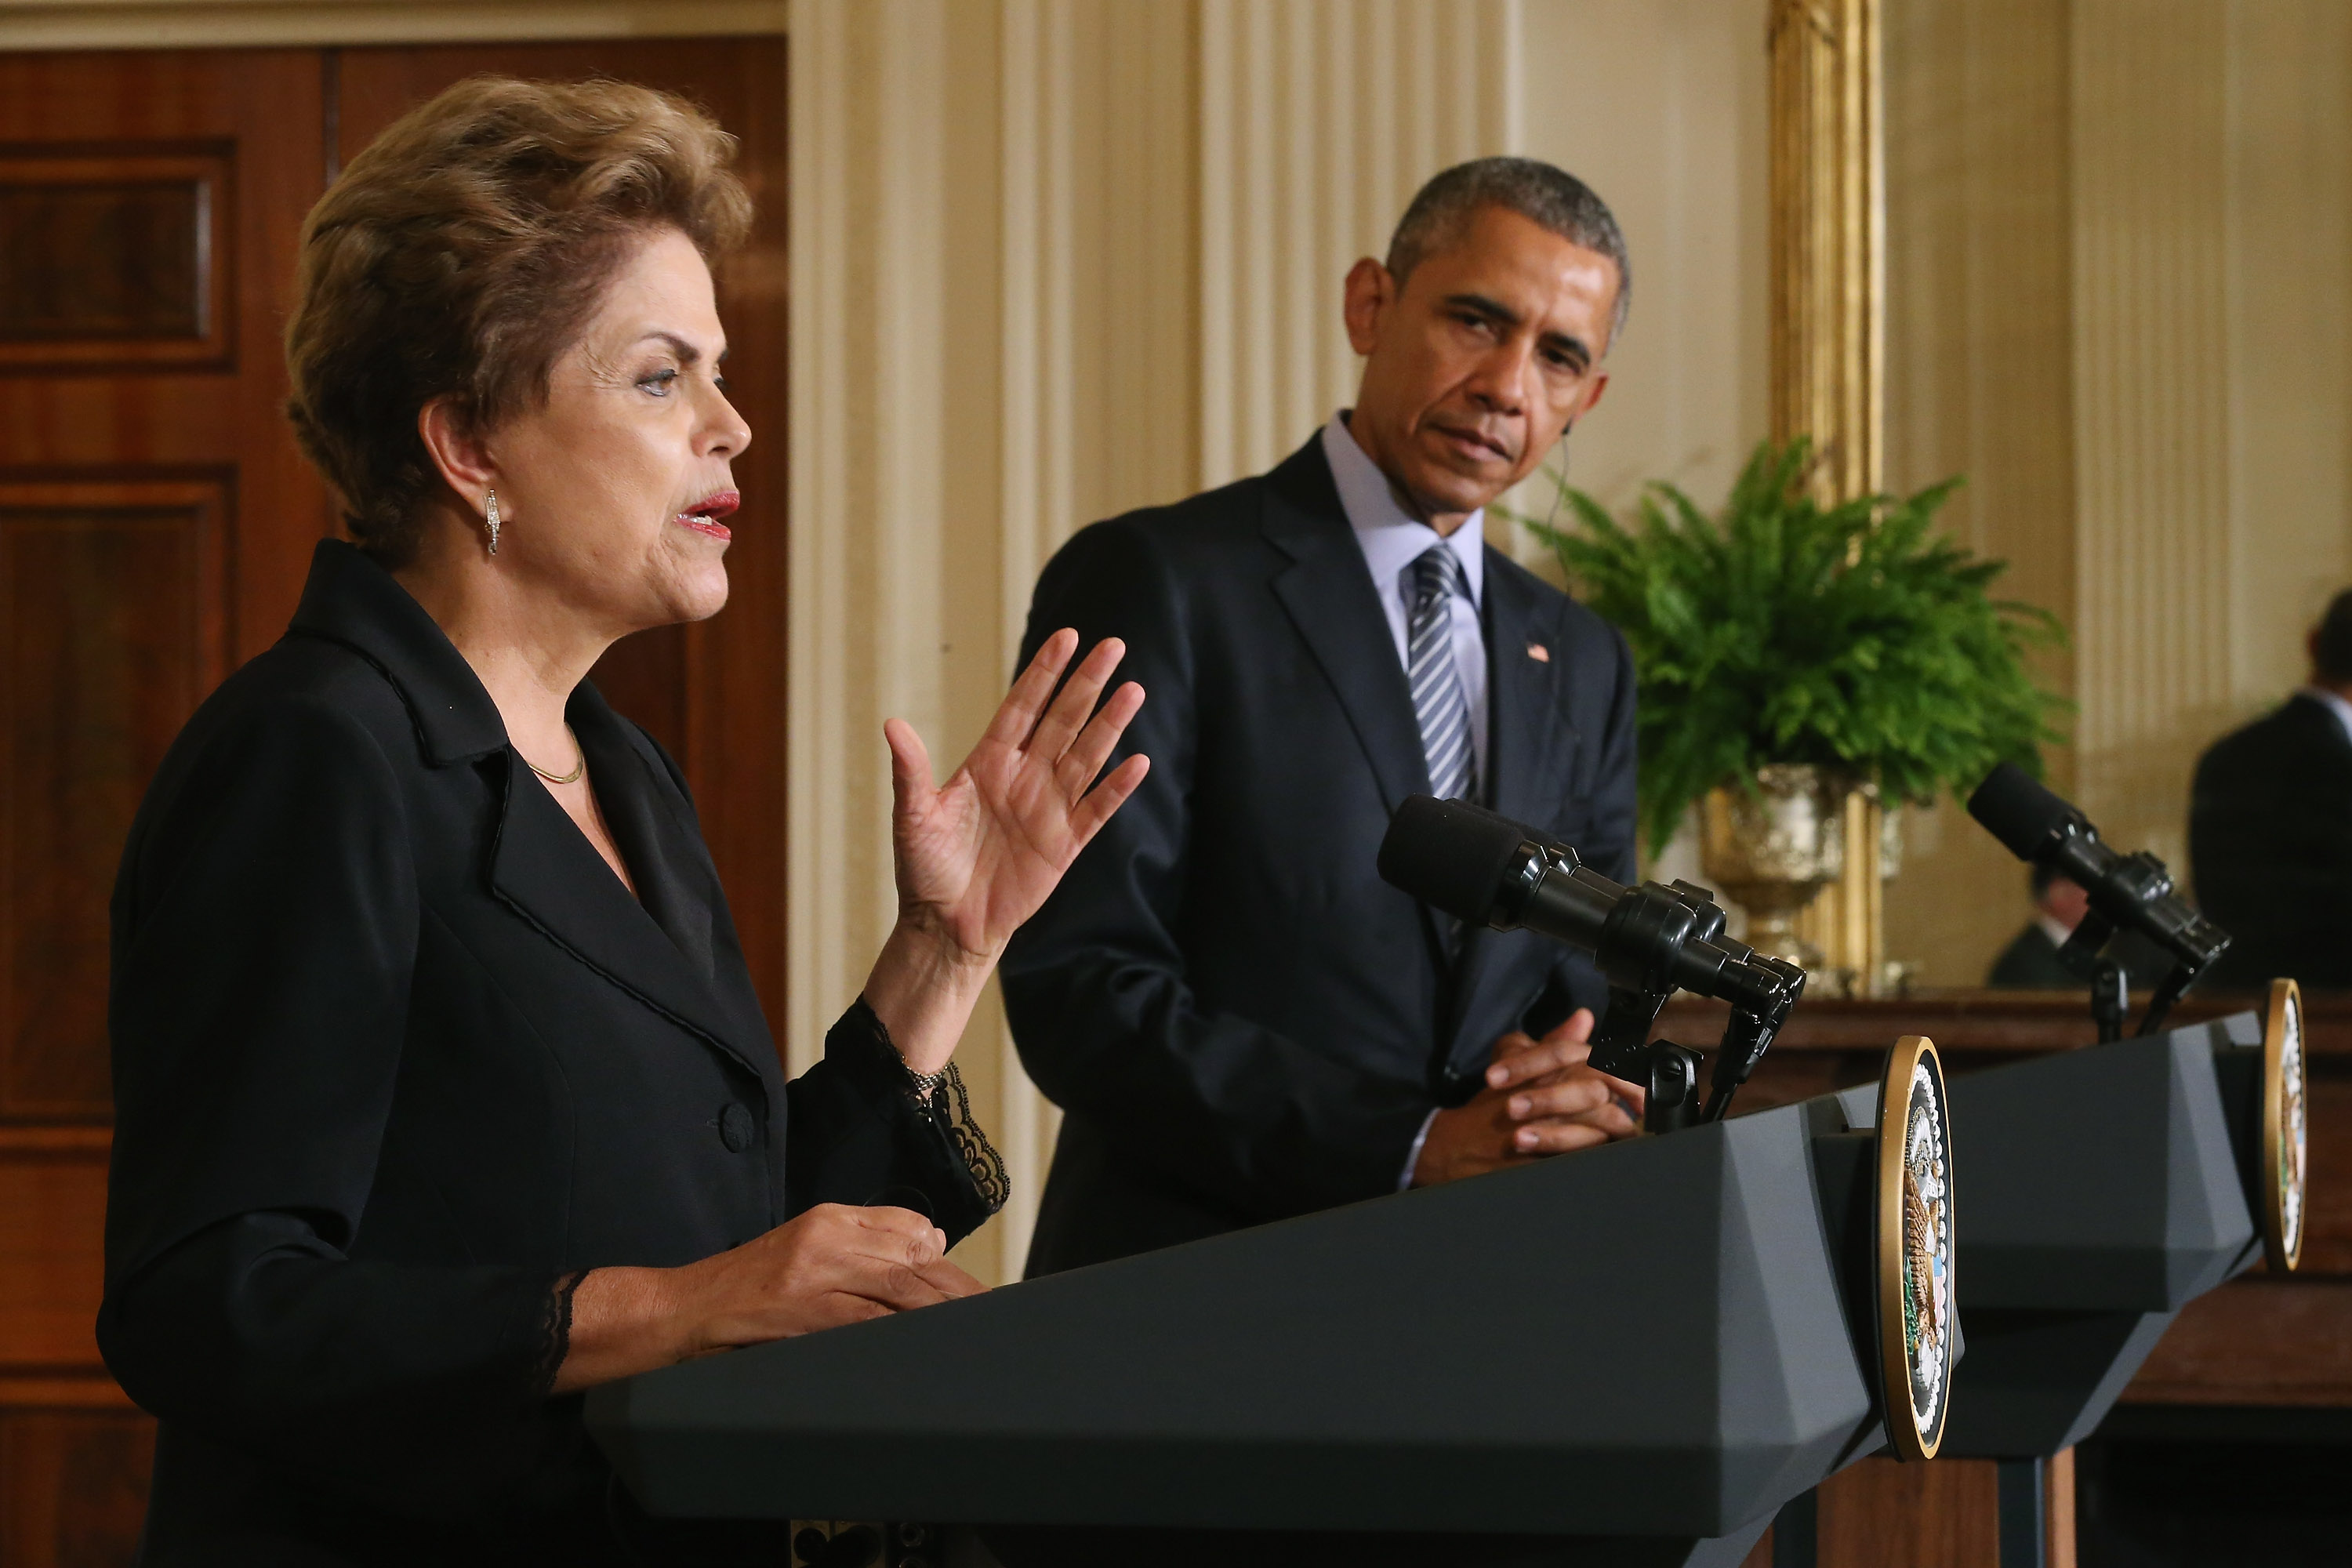 Brazilian President Dilma Rousseff and U.S. President Barack Obama hold a news conference at the White House June 30, 2015. (Chip Somodevilla—Getty Images)